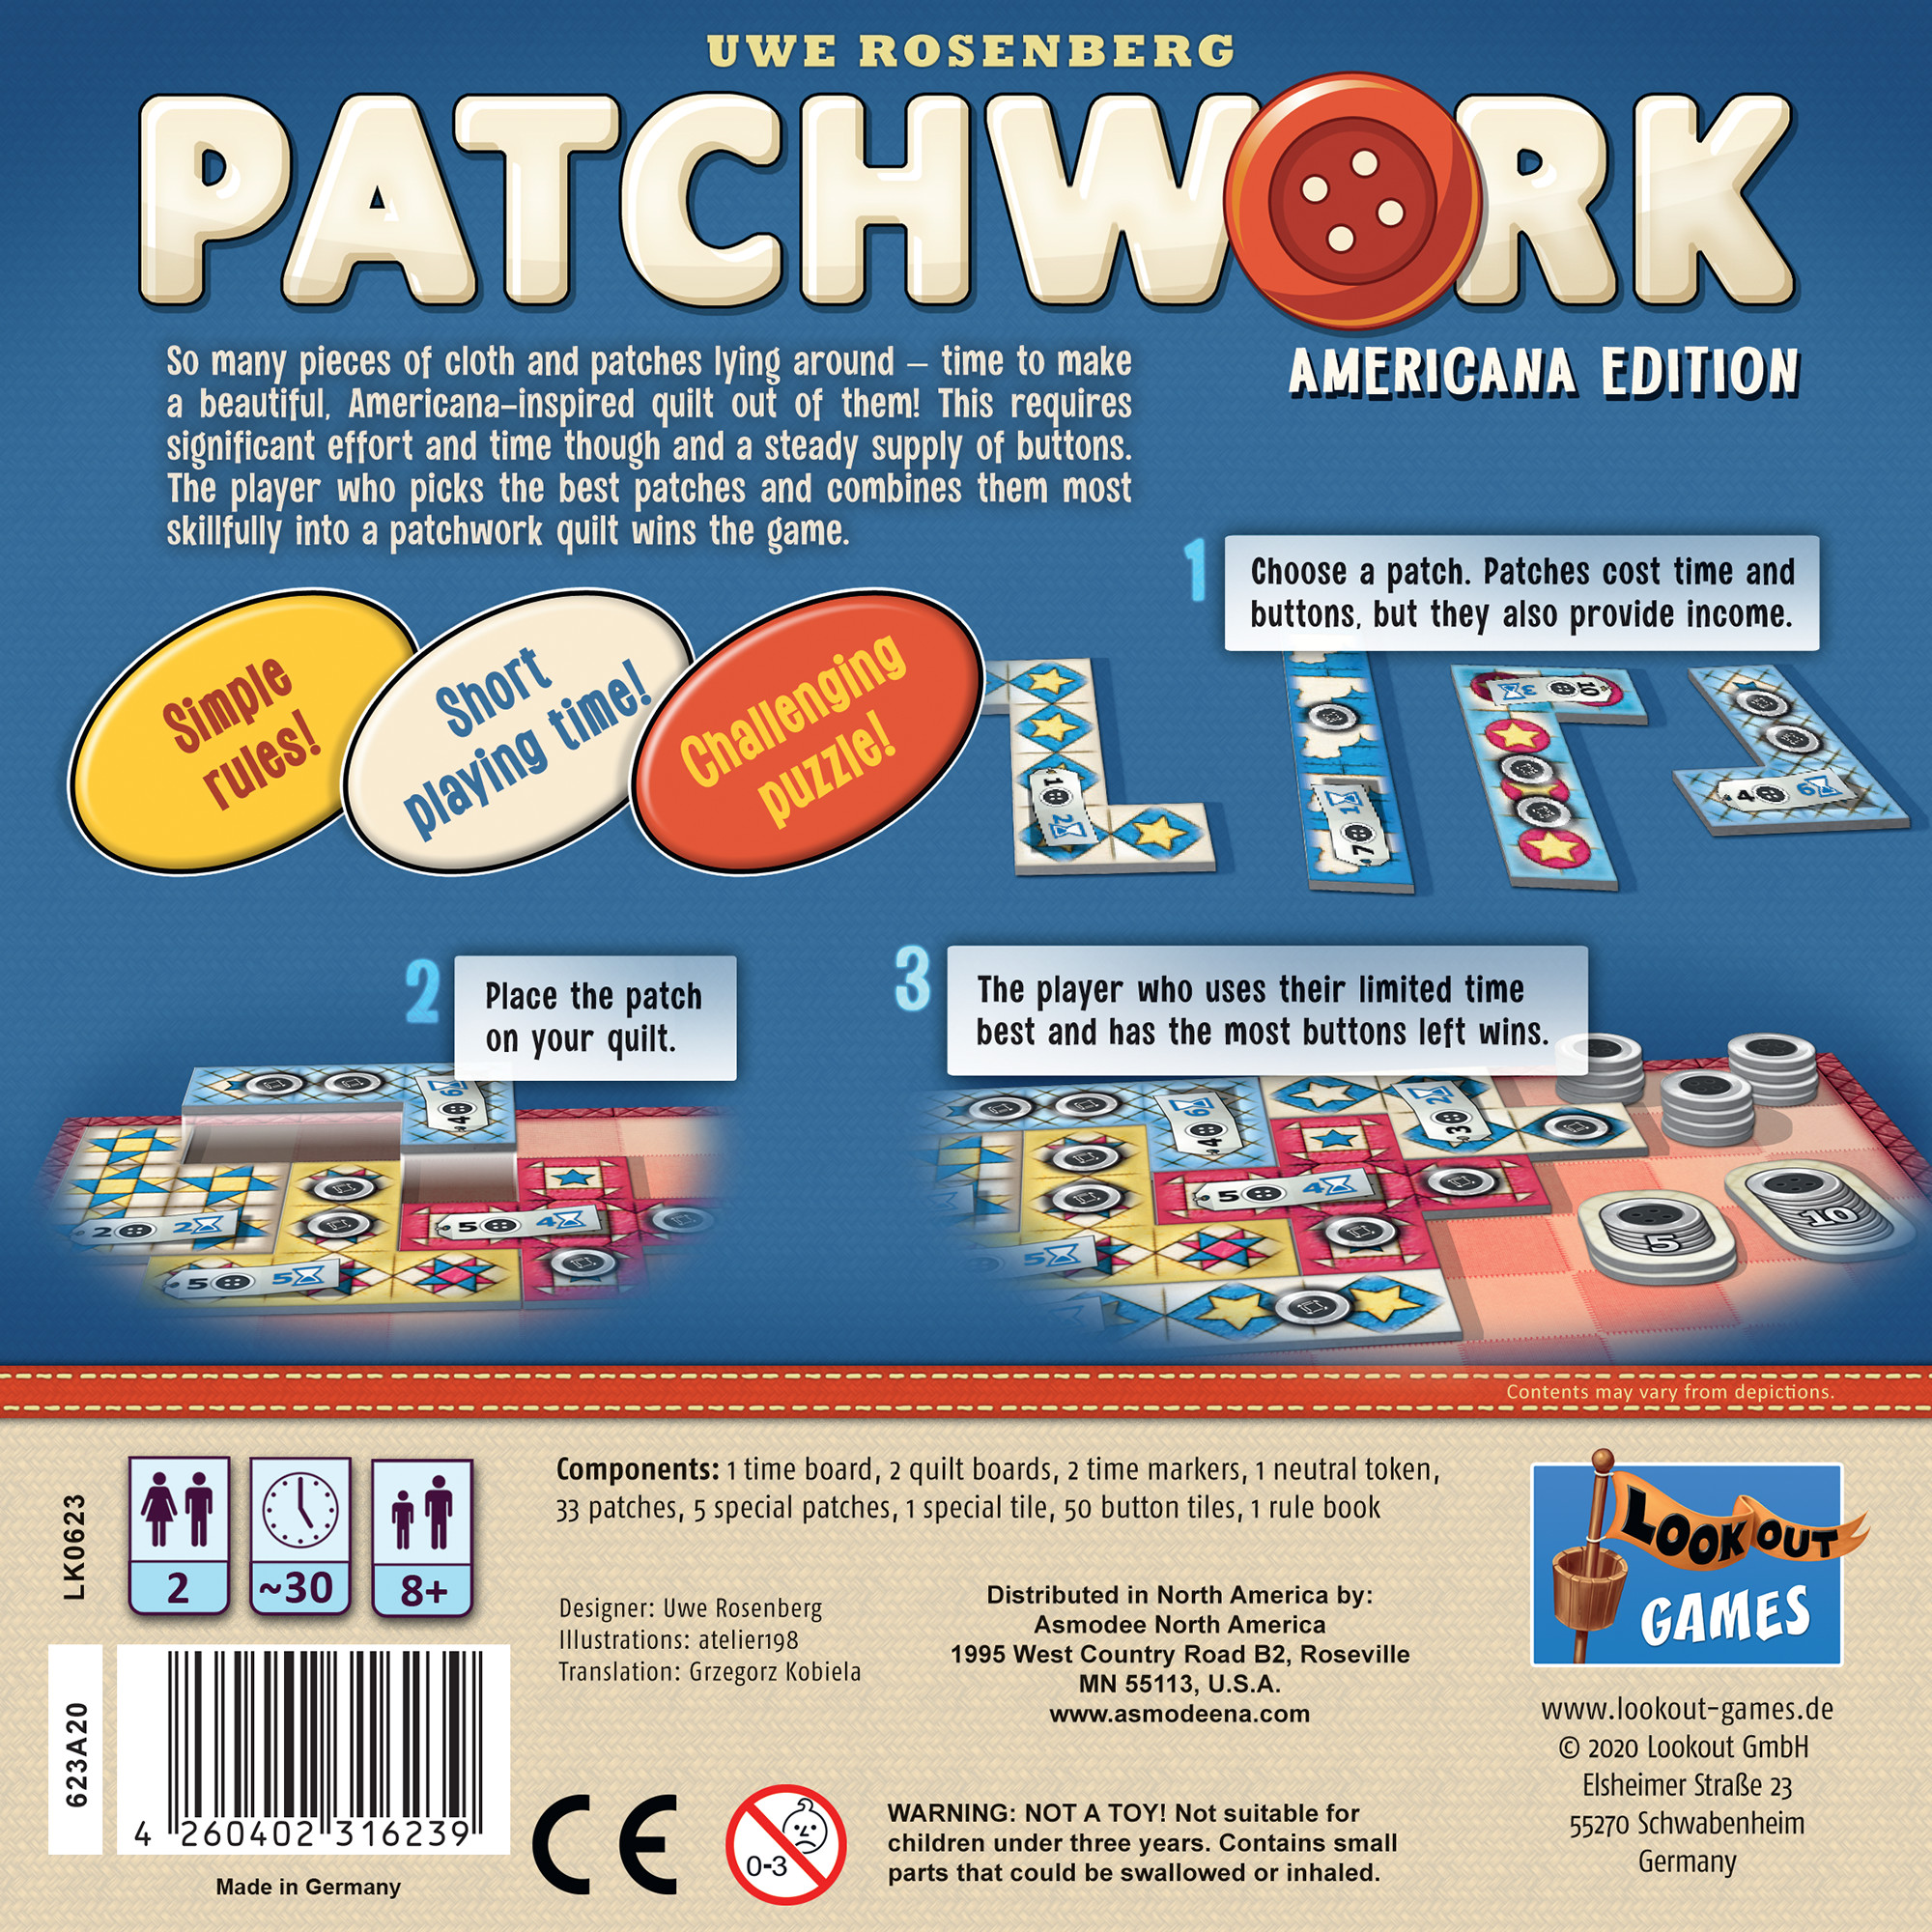 Patchwork Americana Family Board Game for Ages 8 and up, from Asmodee - image 2 of 5